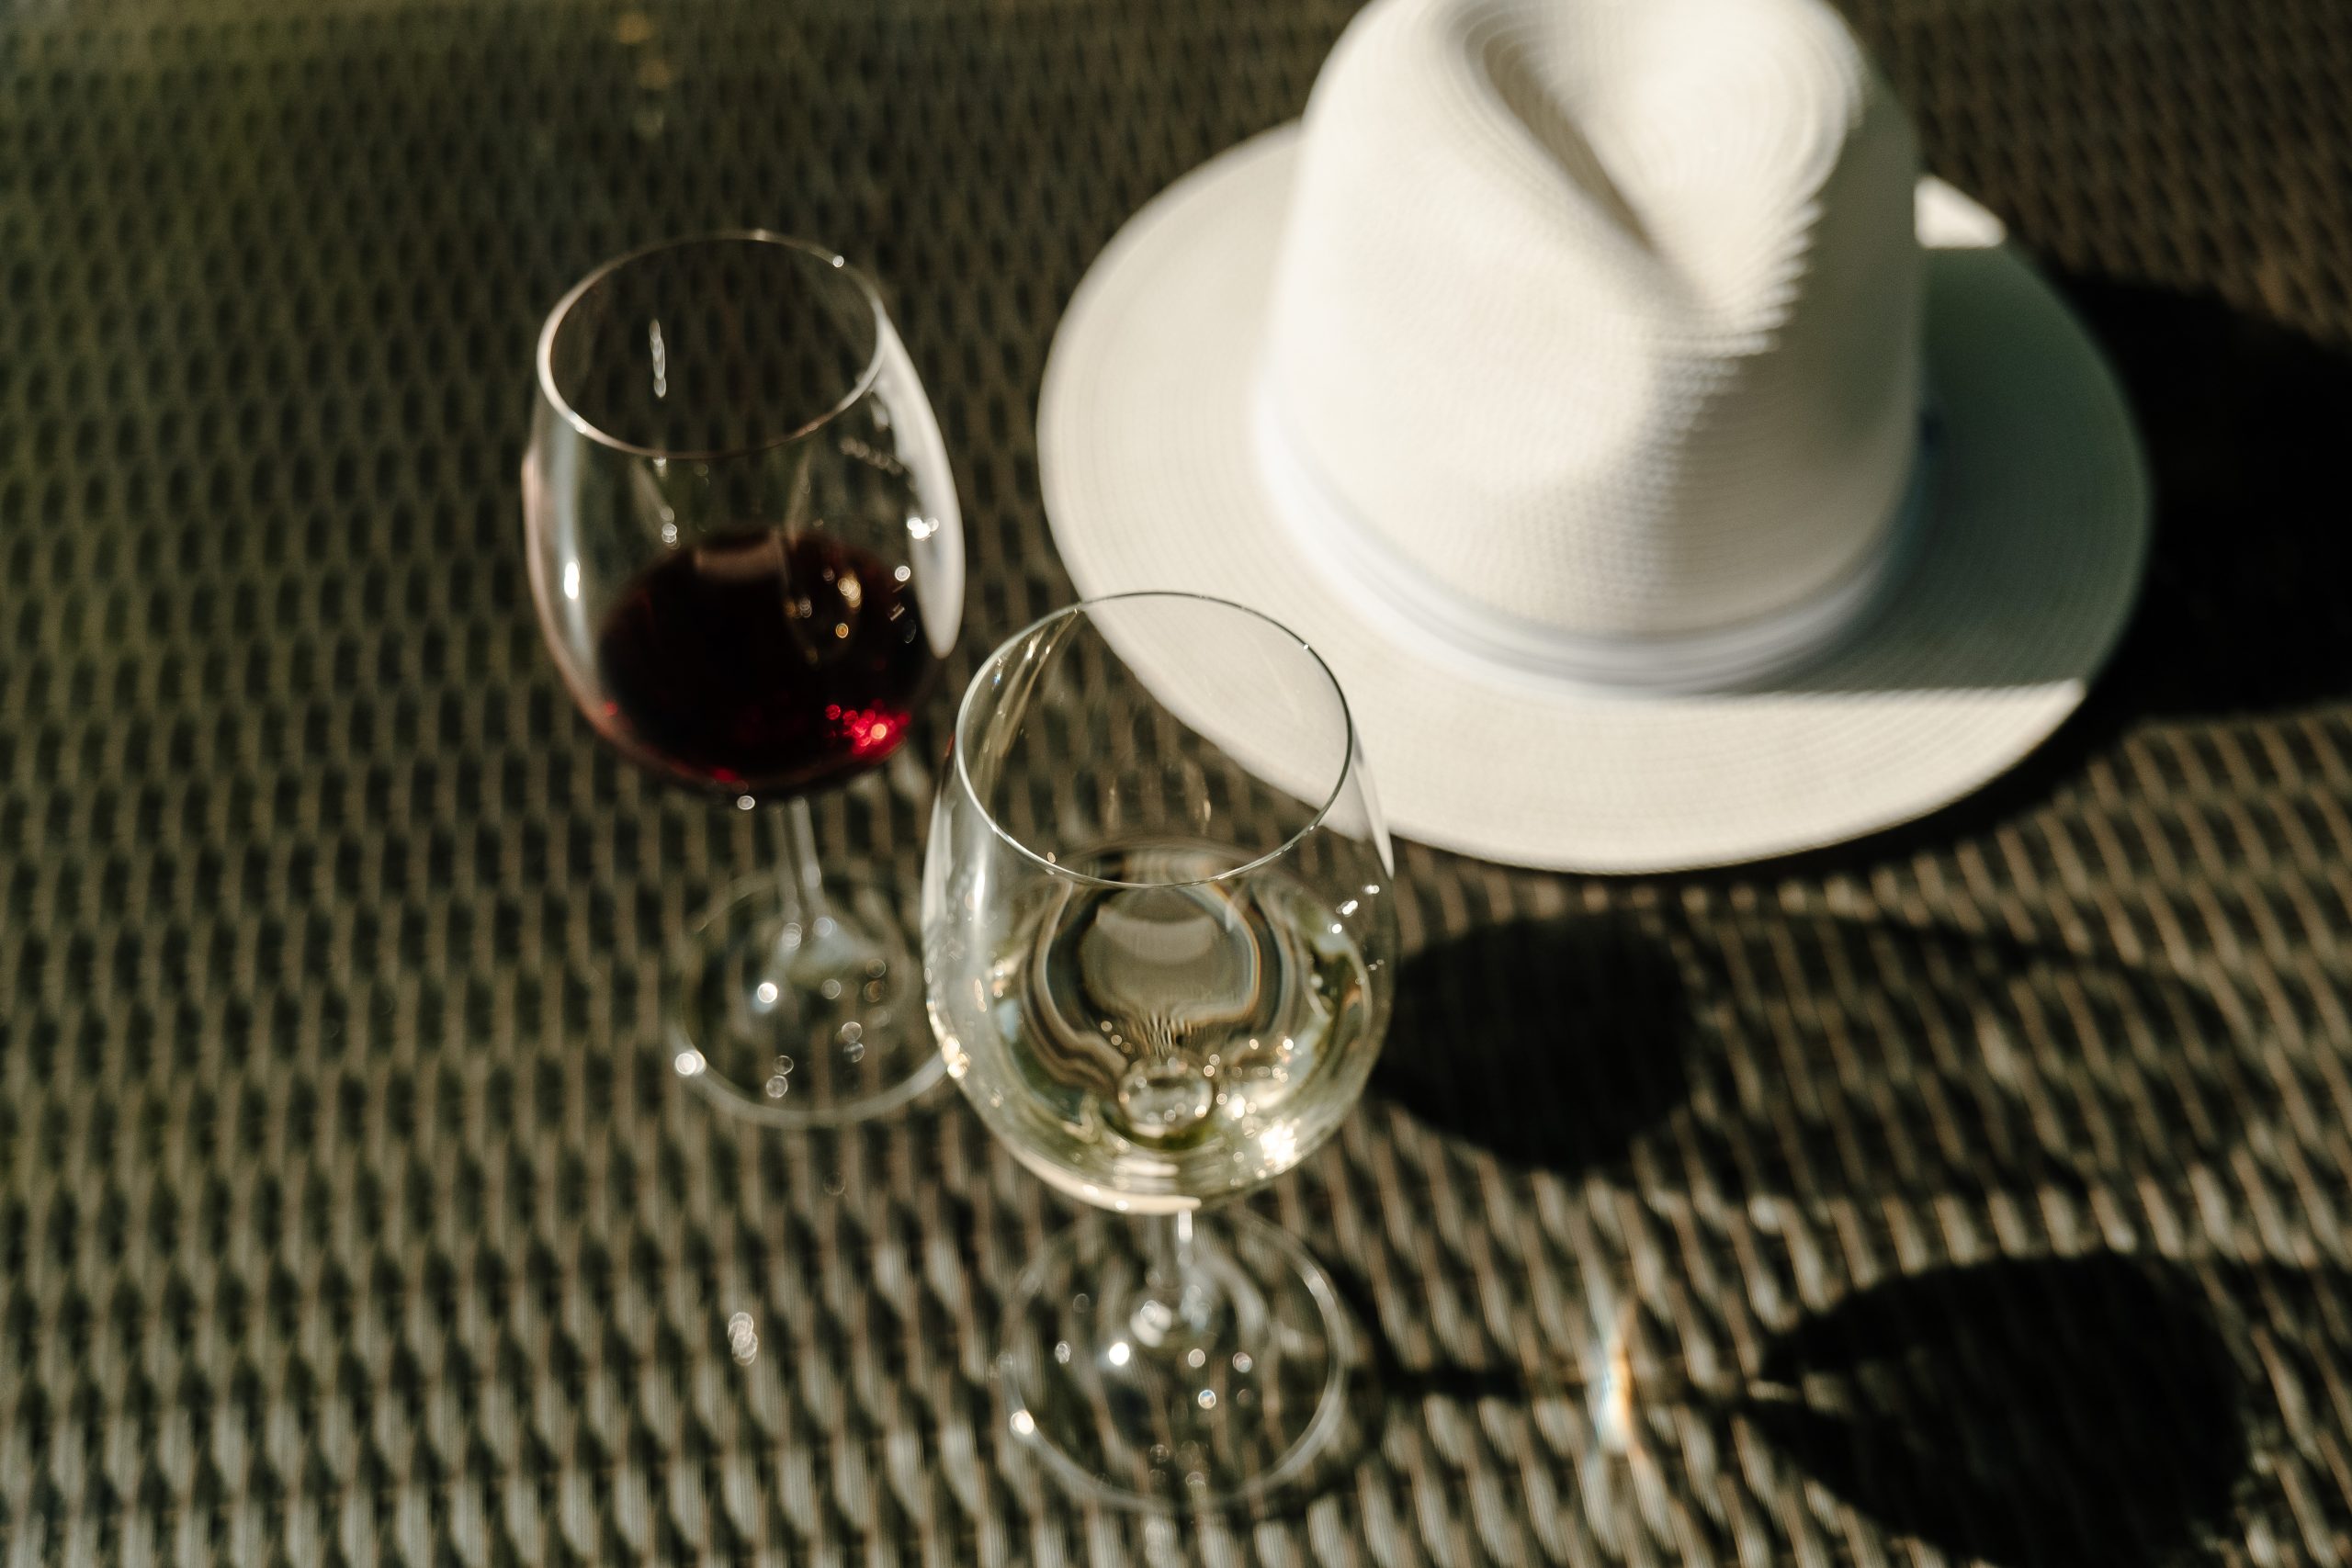 Hat and two wine glasses